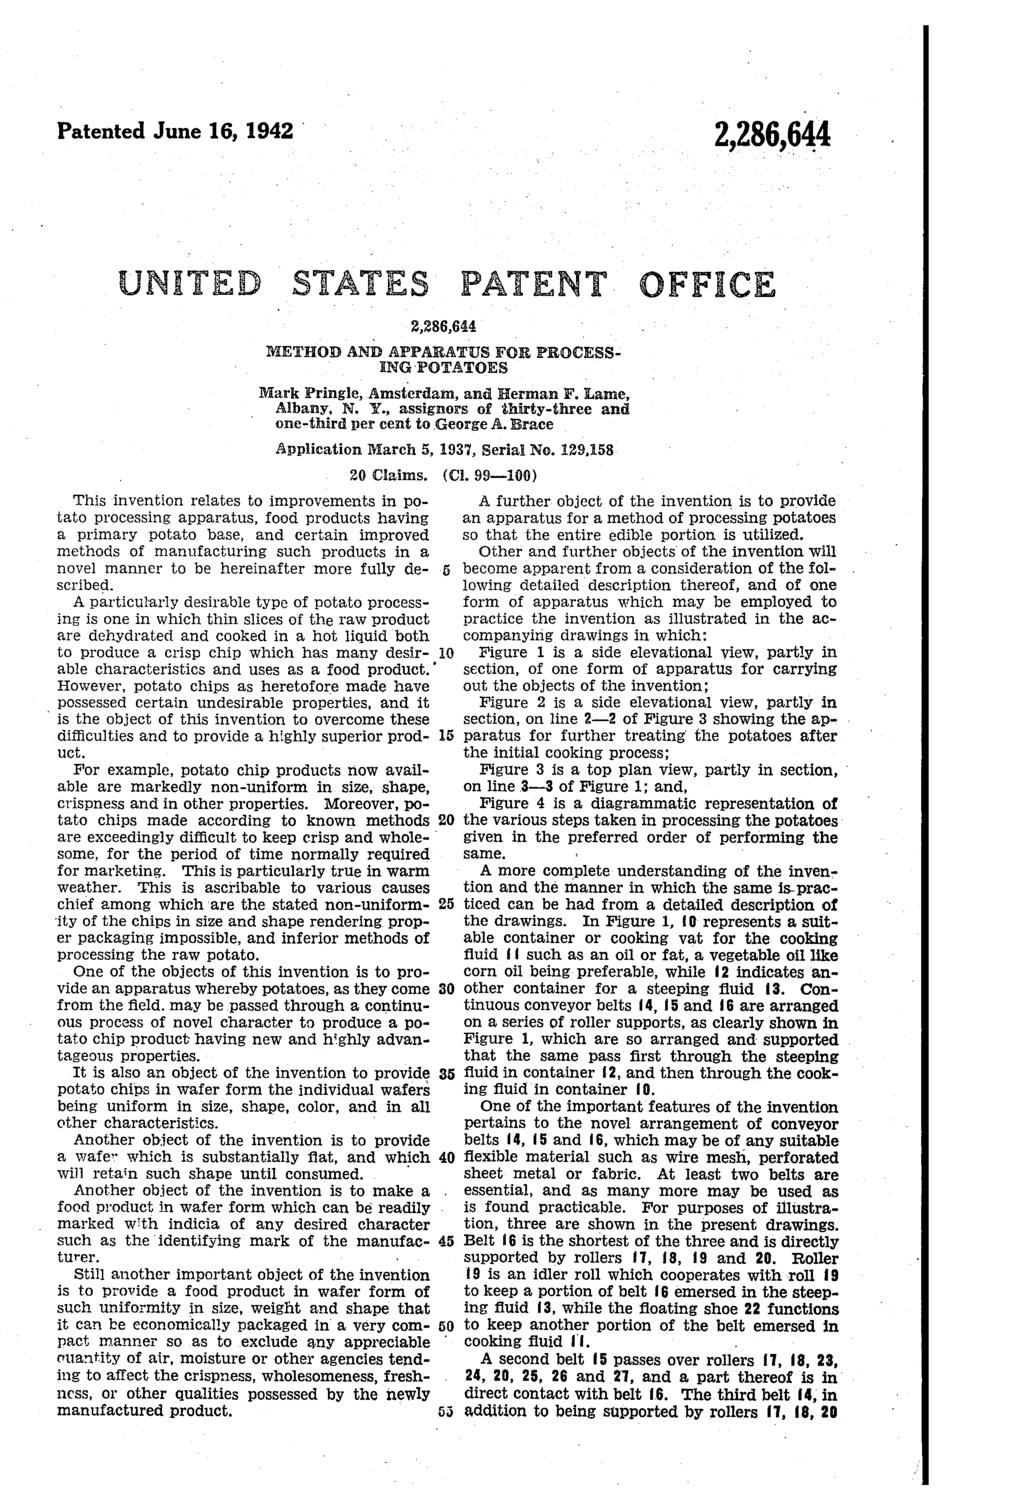 Patented June 16, 1942 M UNITED STATES PATENT OFFICE METHOD AND APPARATUS FOR PROCEss NG POTETAATTORES Mark Pringle, Amsterdam, and Herman F. Lamae, Albany, N. Y.